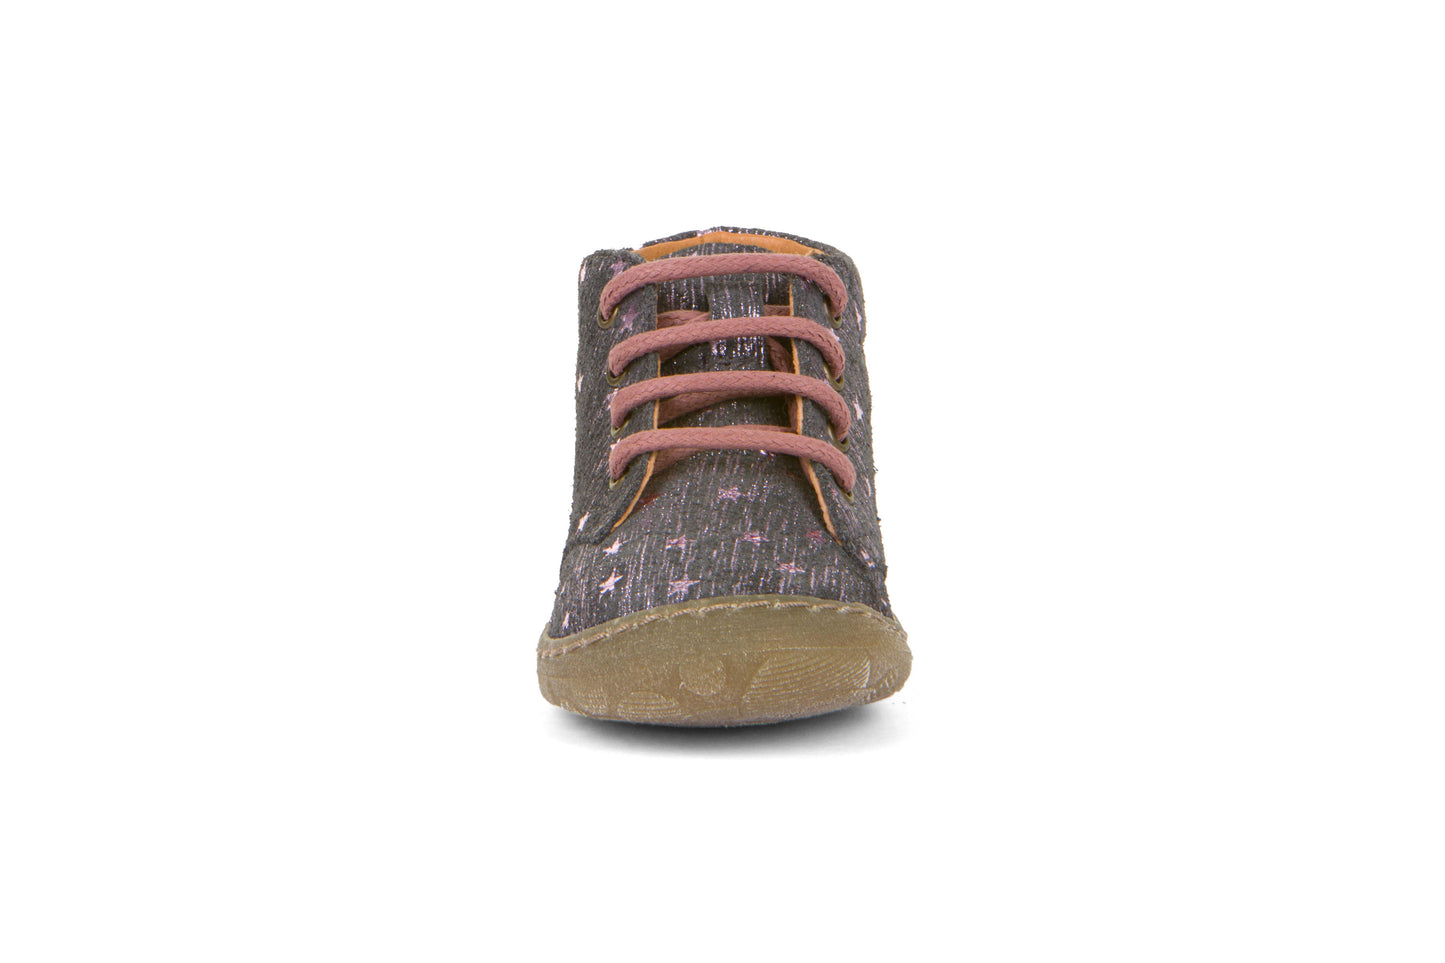 A girls boot by Froddo, style Kart Laces | G2130271-3 in Grey Metallic with star print and lace-up fastening. Front view.